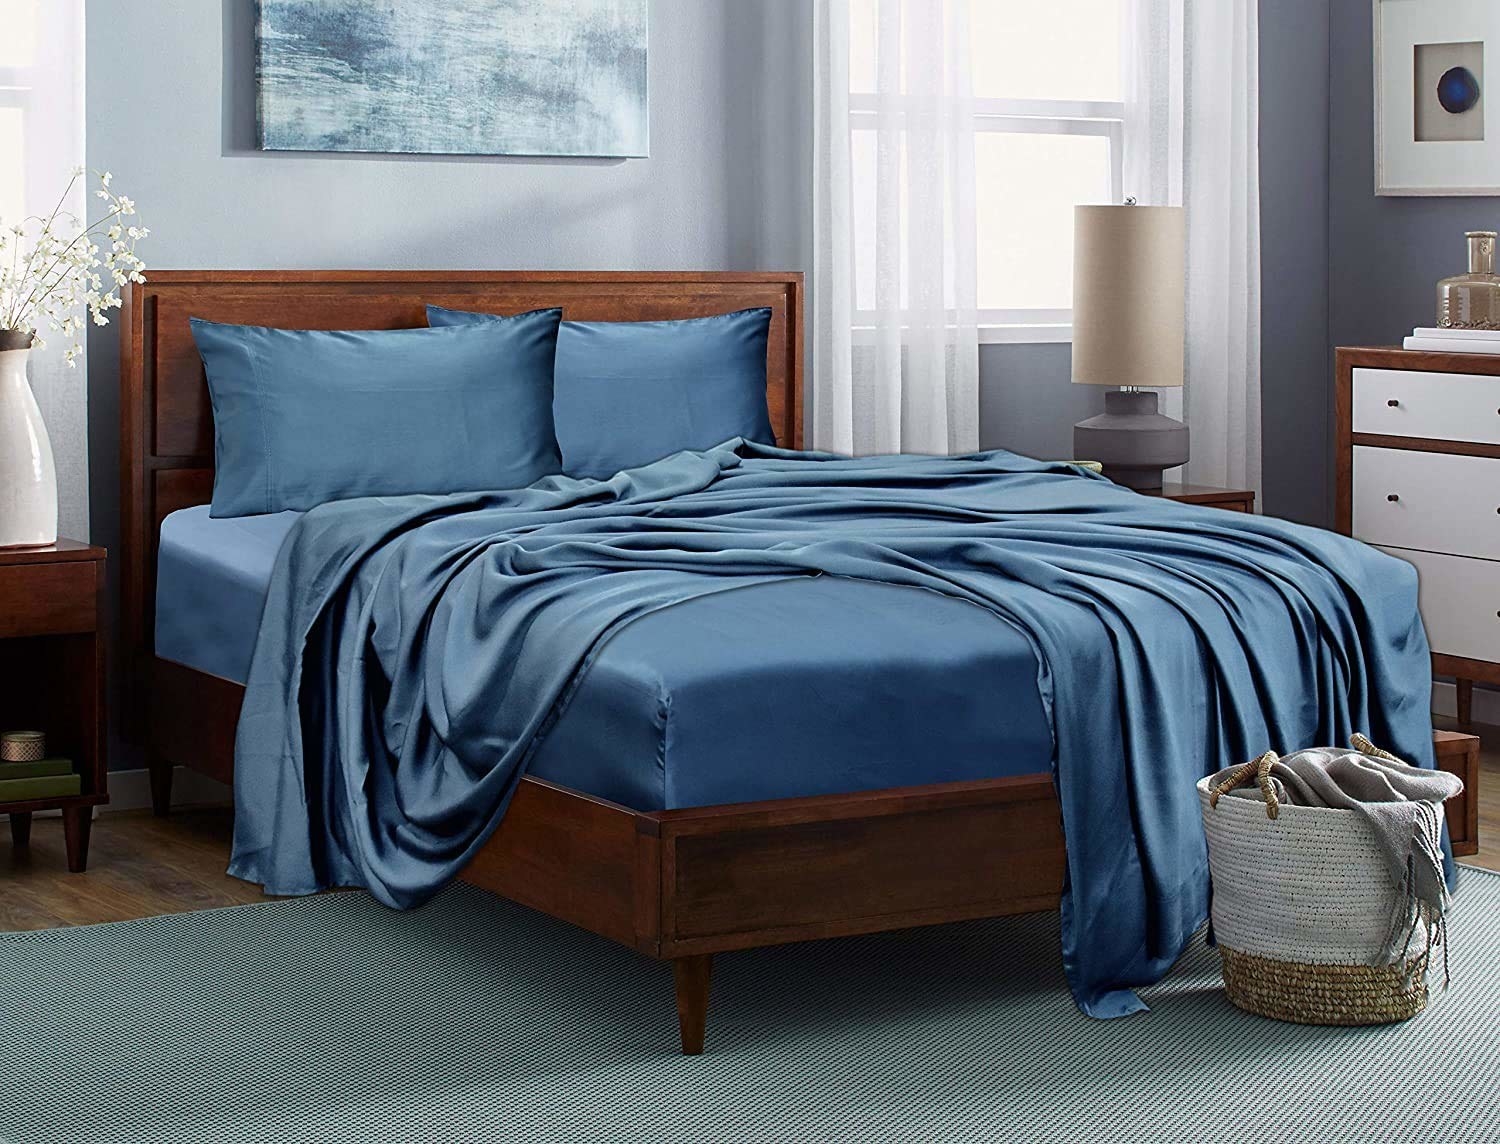 Blue bedsheet and pillow covers on a bed